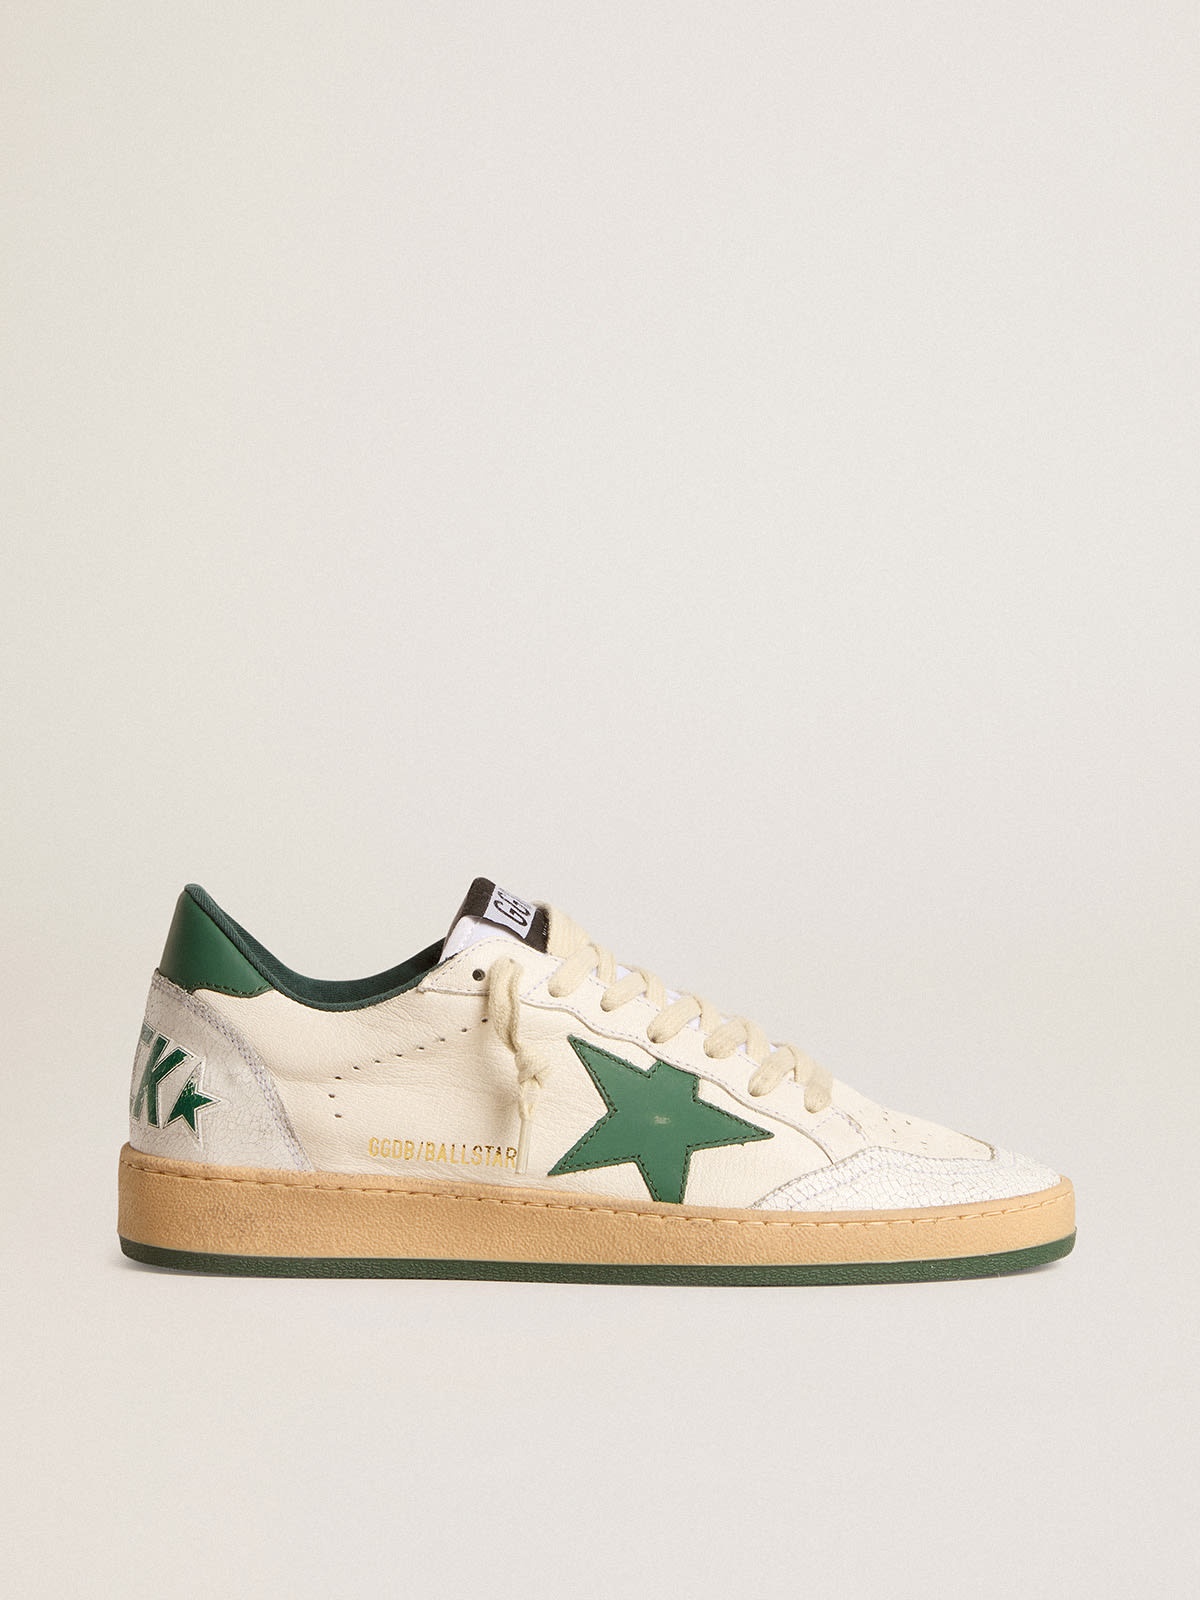 Women's Ball Star Wishes in white nappa leather with green leather star and heel tab - 1